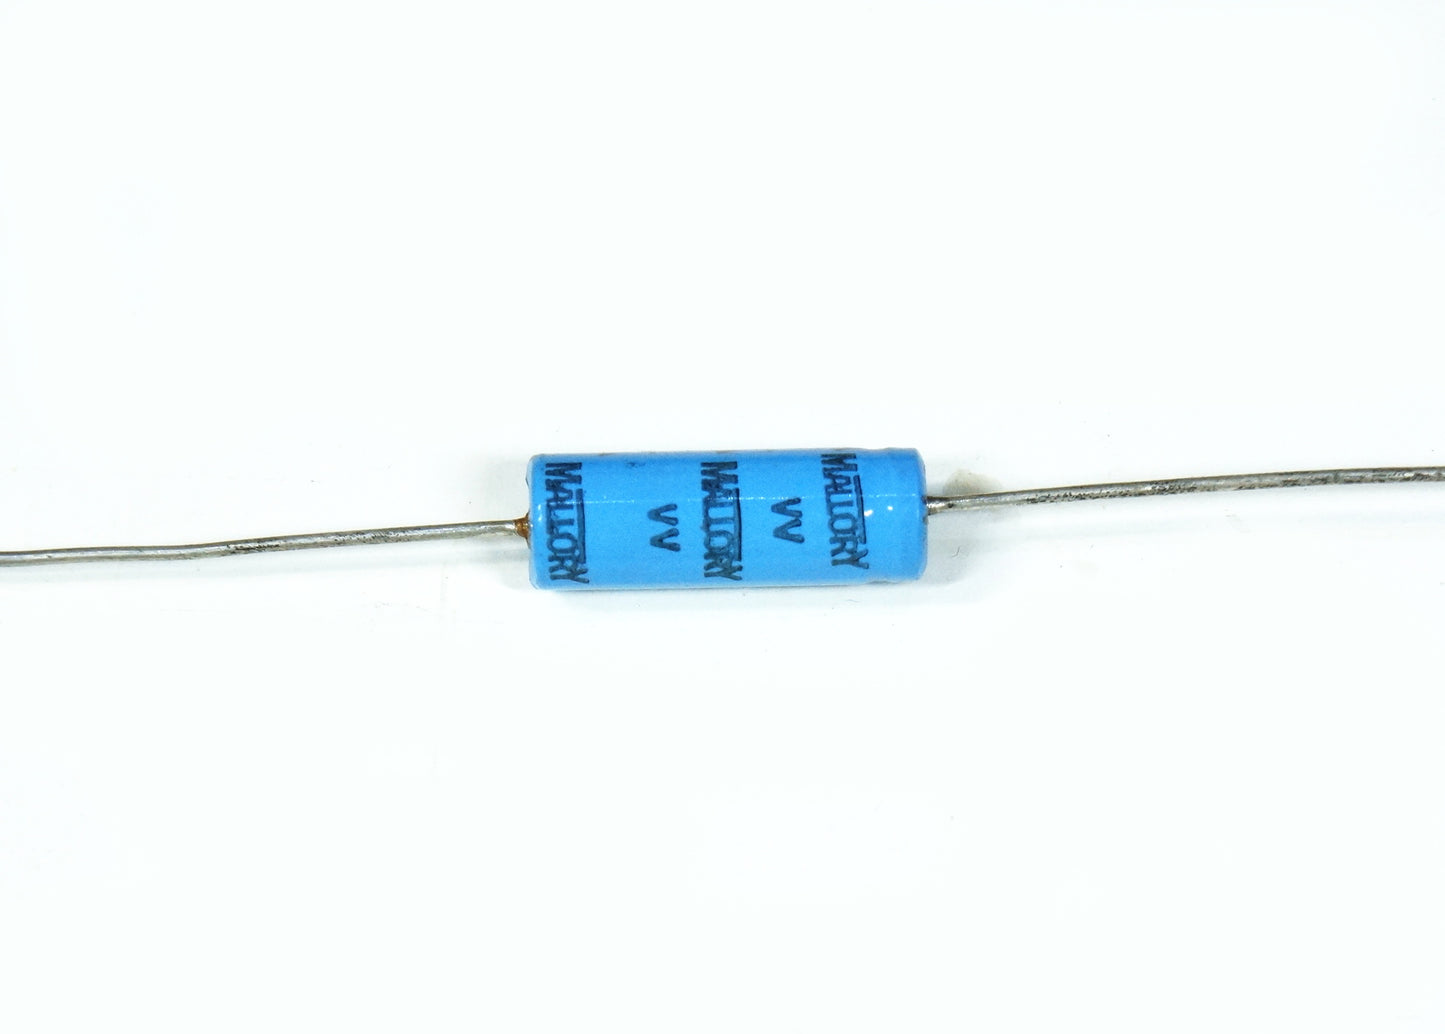 Mallory TT150X2 2uF 150VDC Electrolytic Capacitor Axial Leads